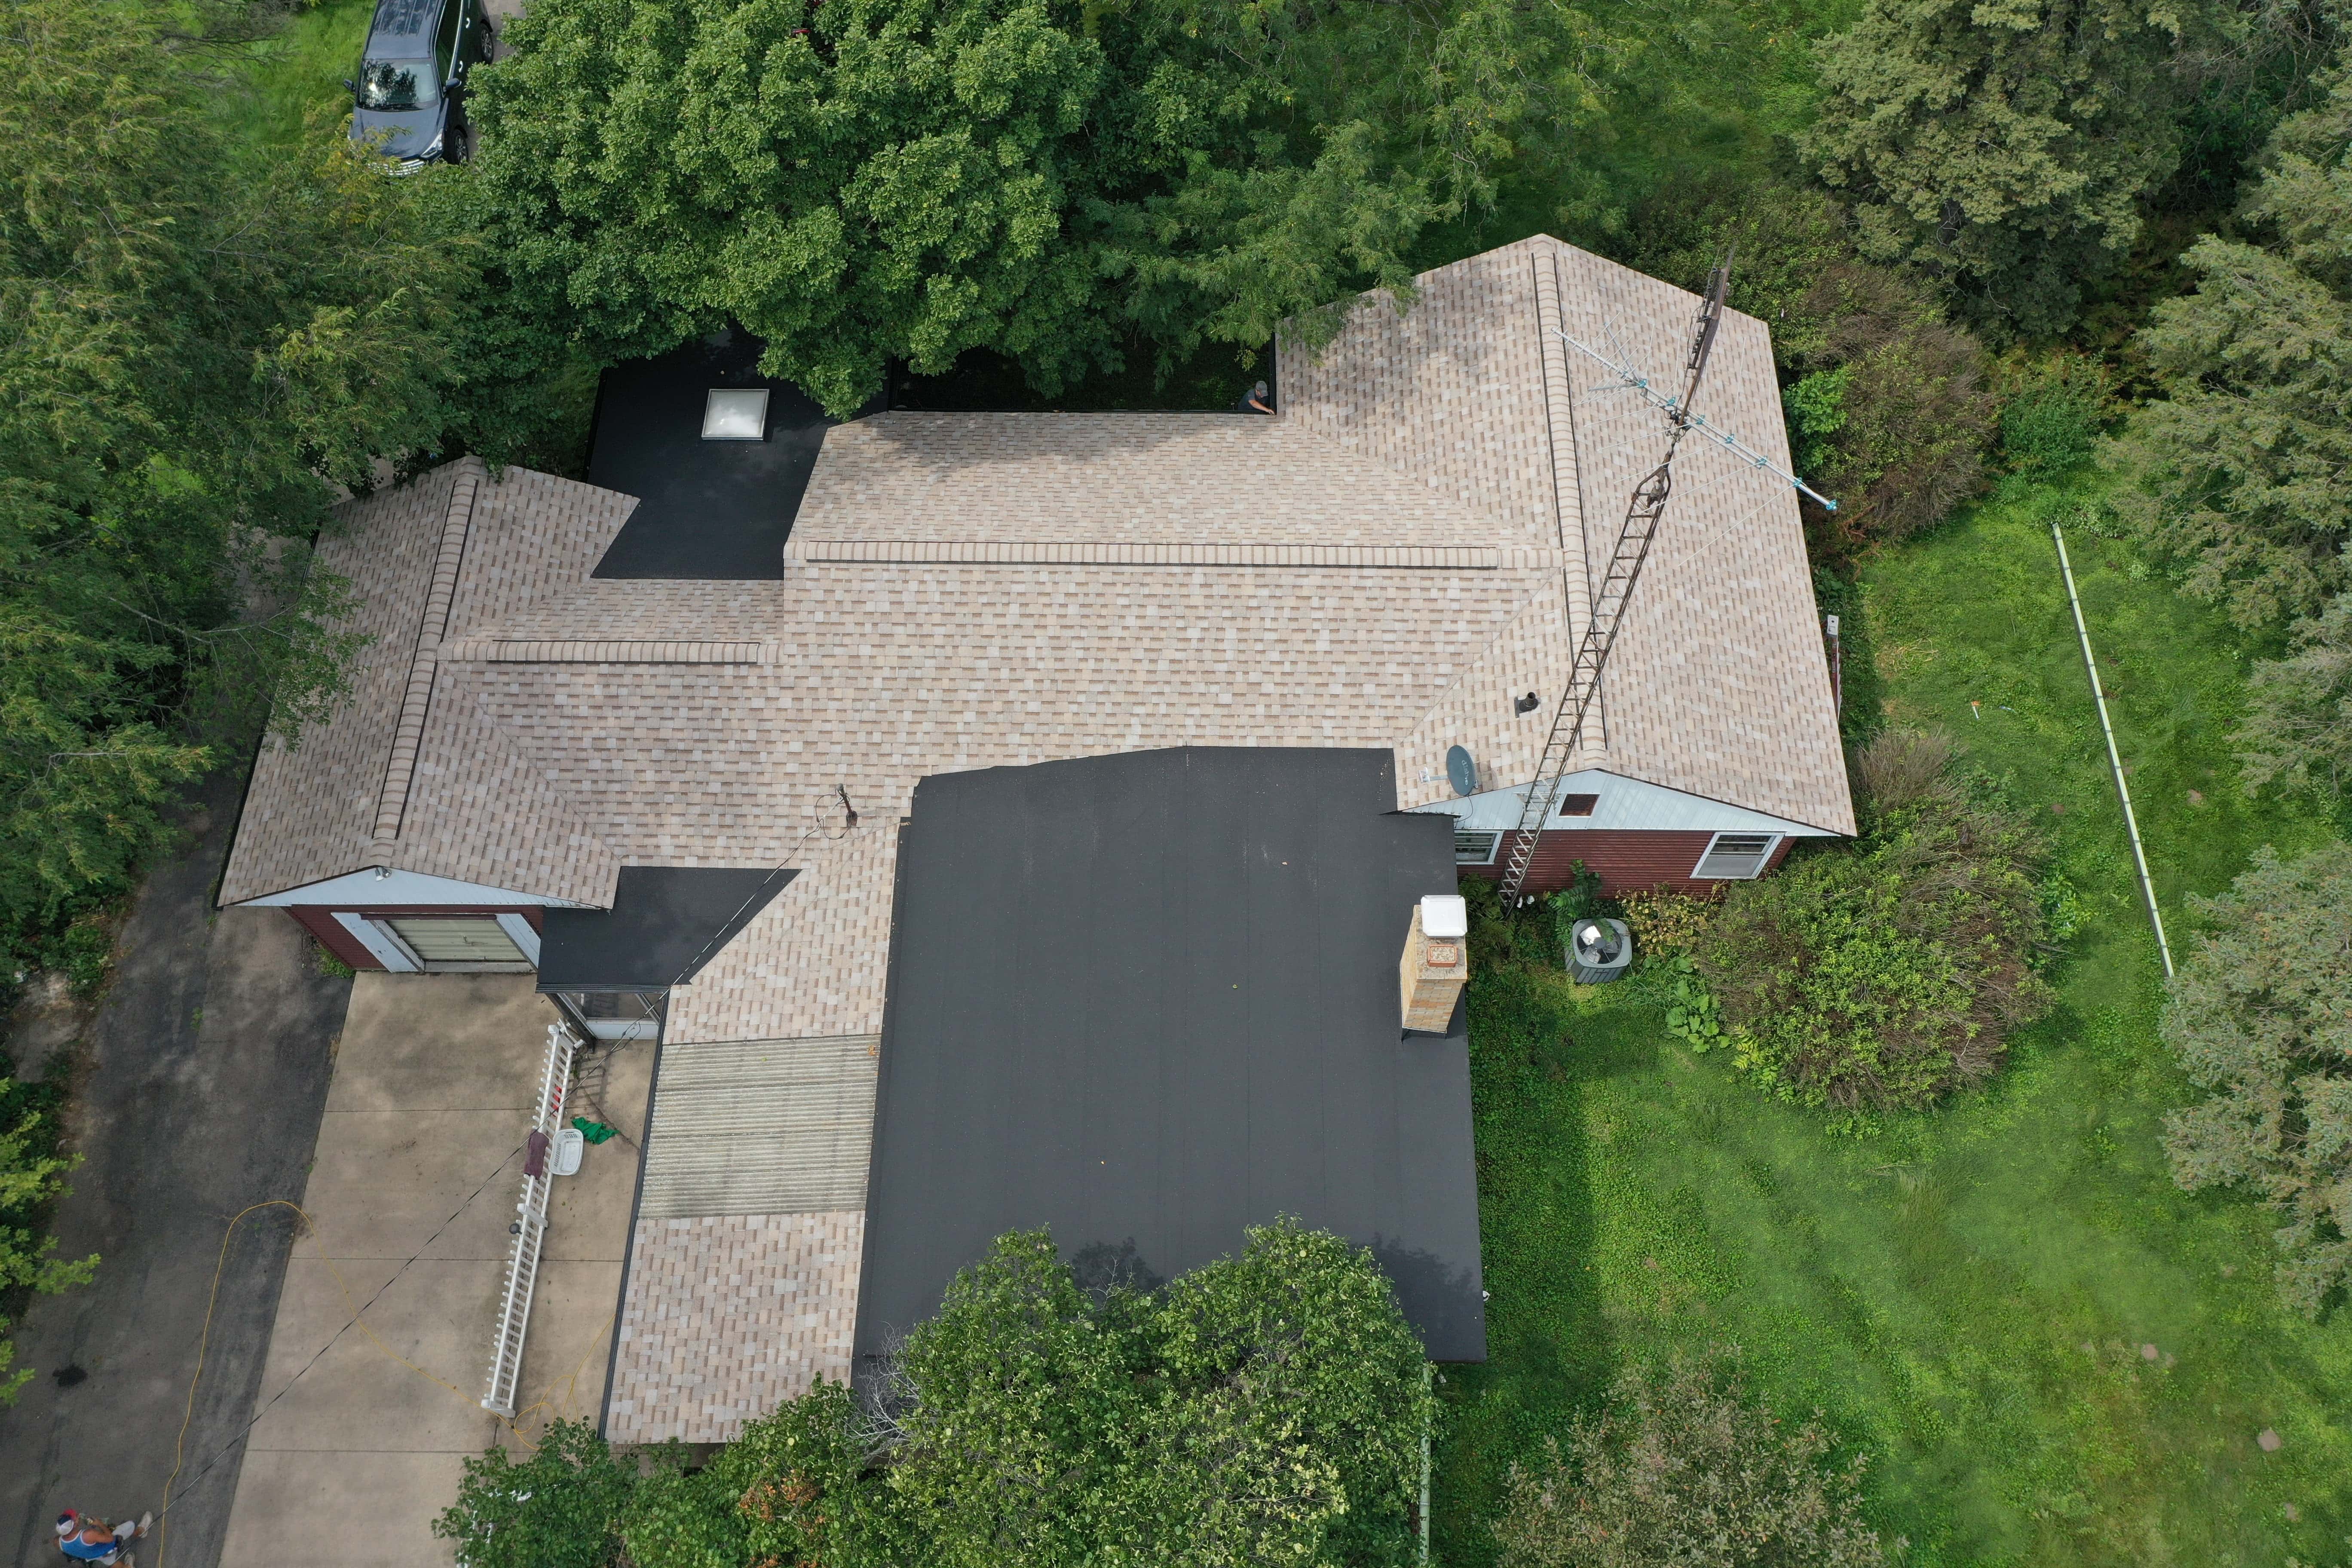 AGG Roofing - La Salle (IL 61301), US, fascia roofing